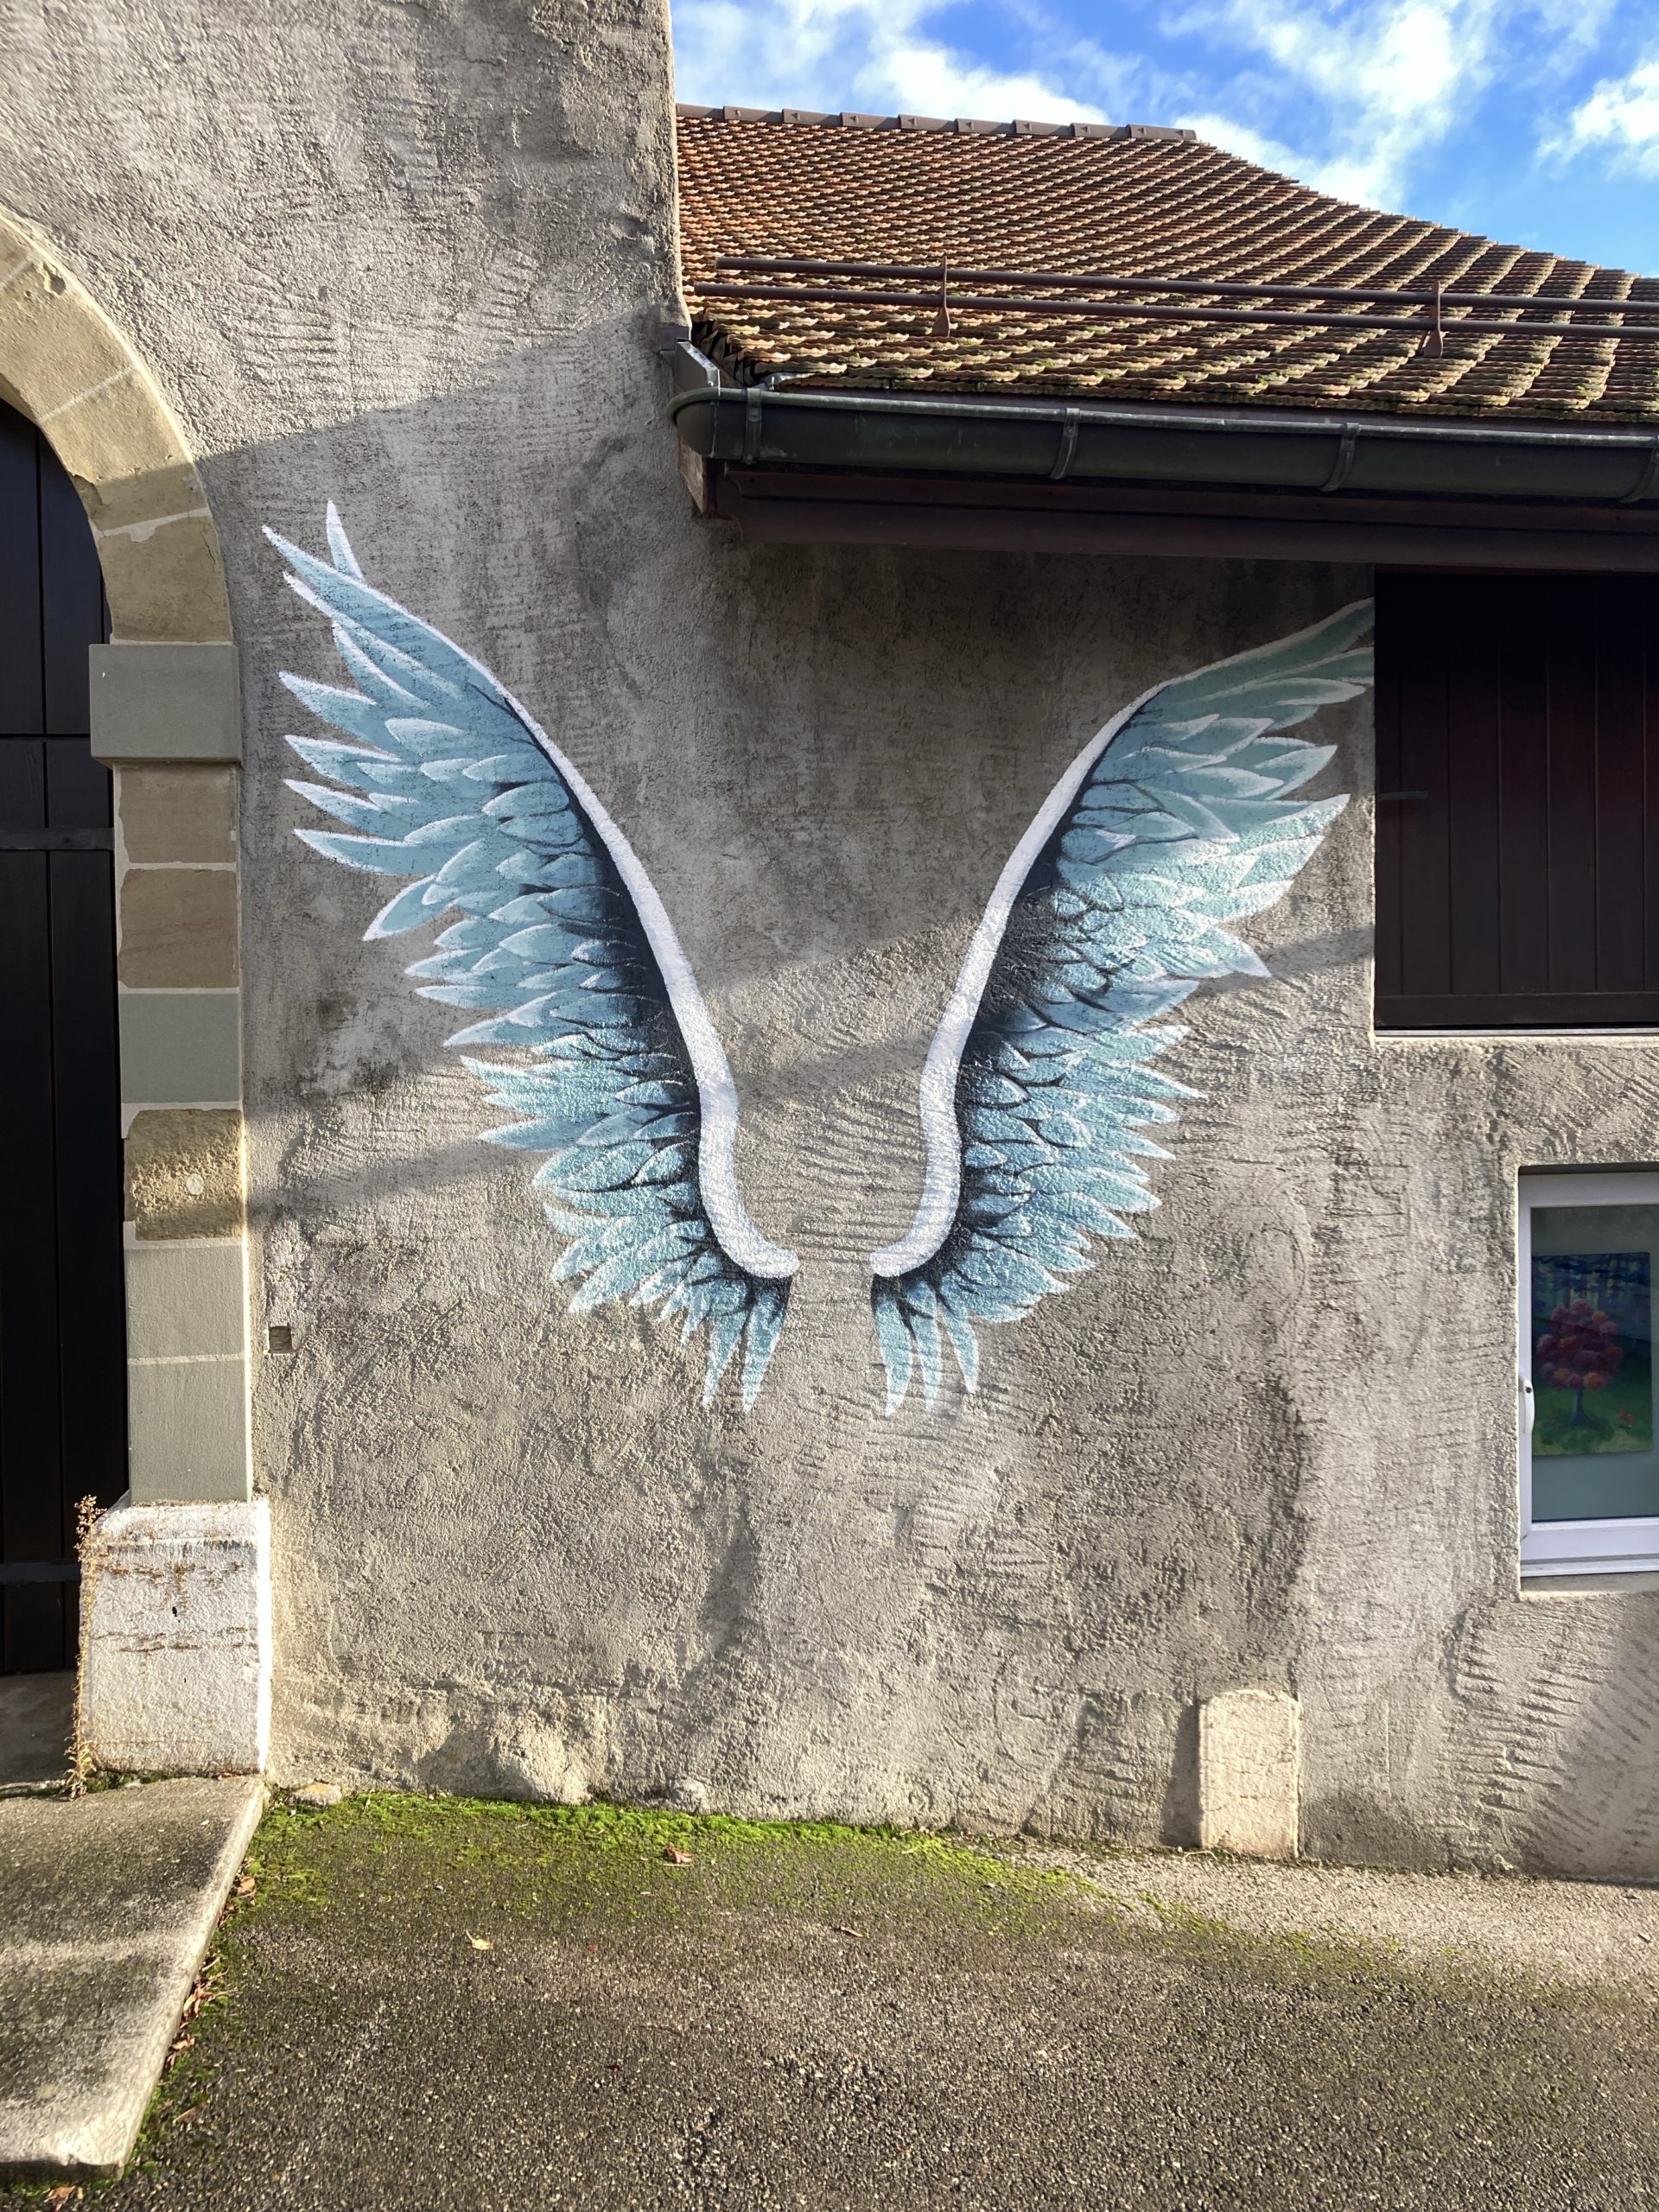 Angel wings painted on a wall. You could stand and be pictured with angel wings.